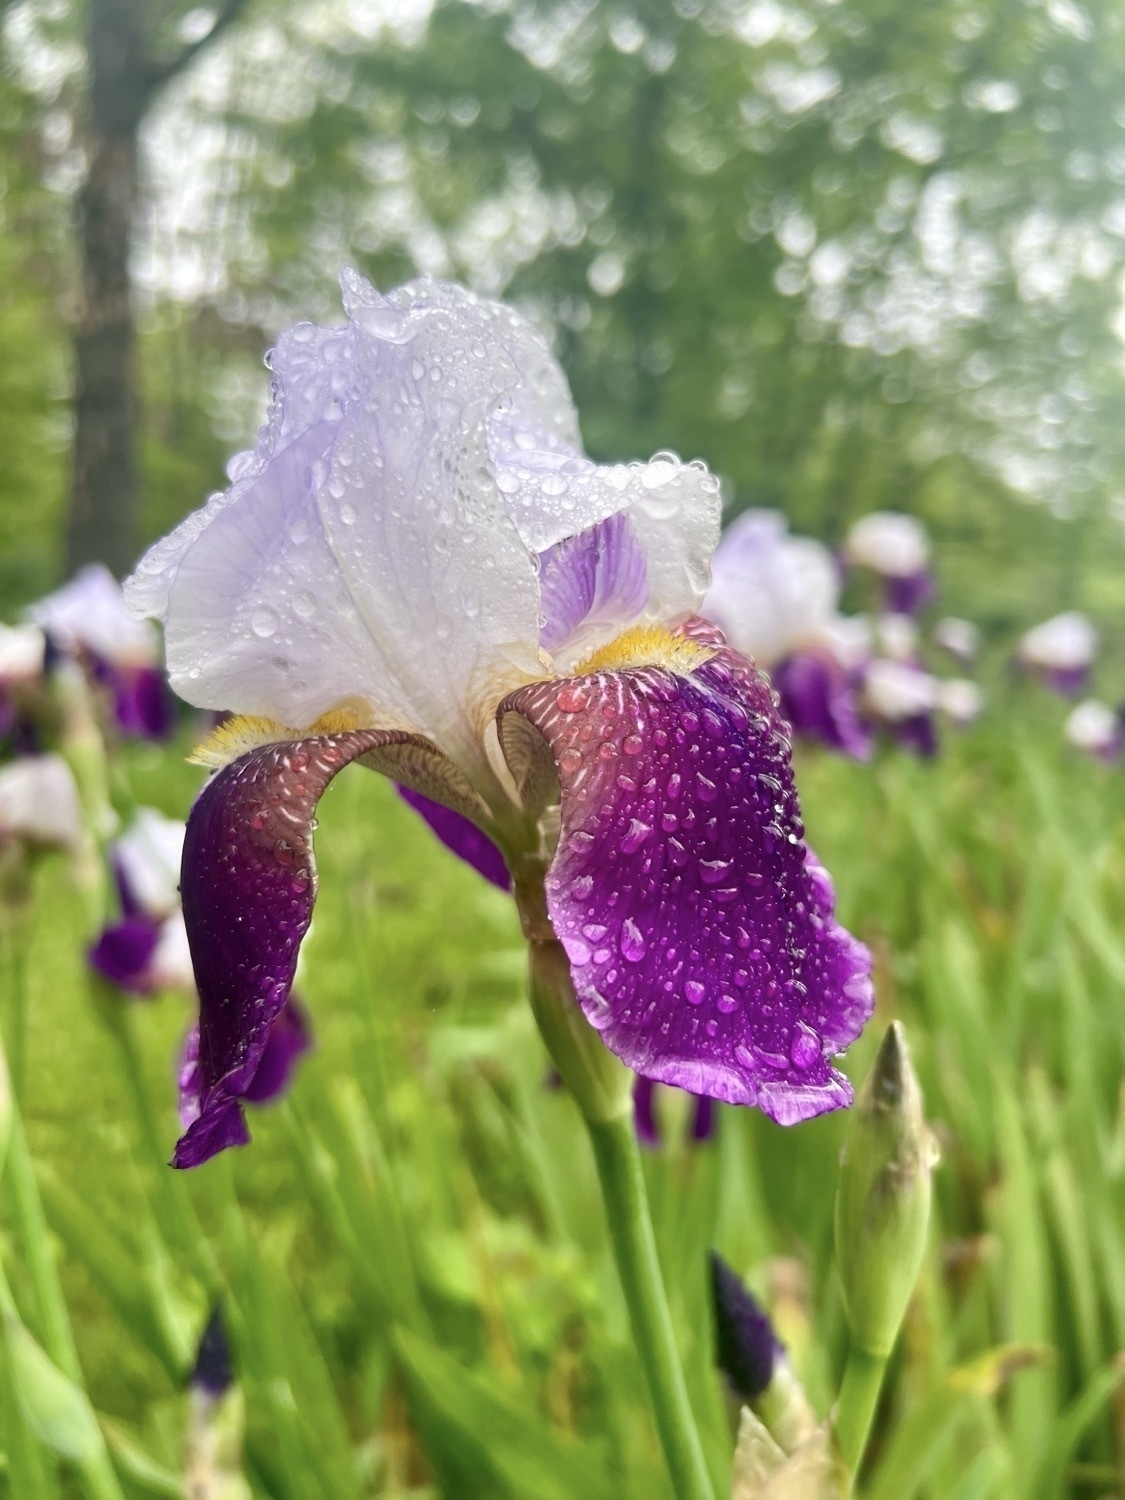 An iris flower covered in morning rain drops. The flower has dark purple lower petals and pale purple upper petals. Centered in the dark purple petals are yellow portions that are feather like.